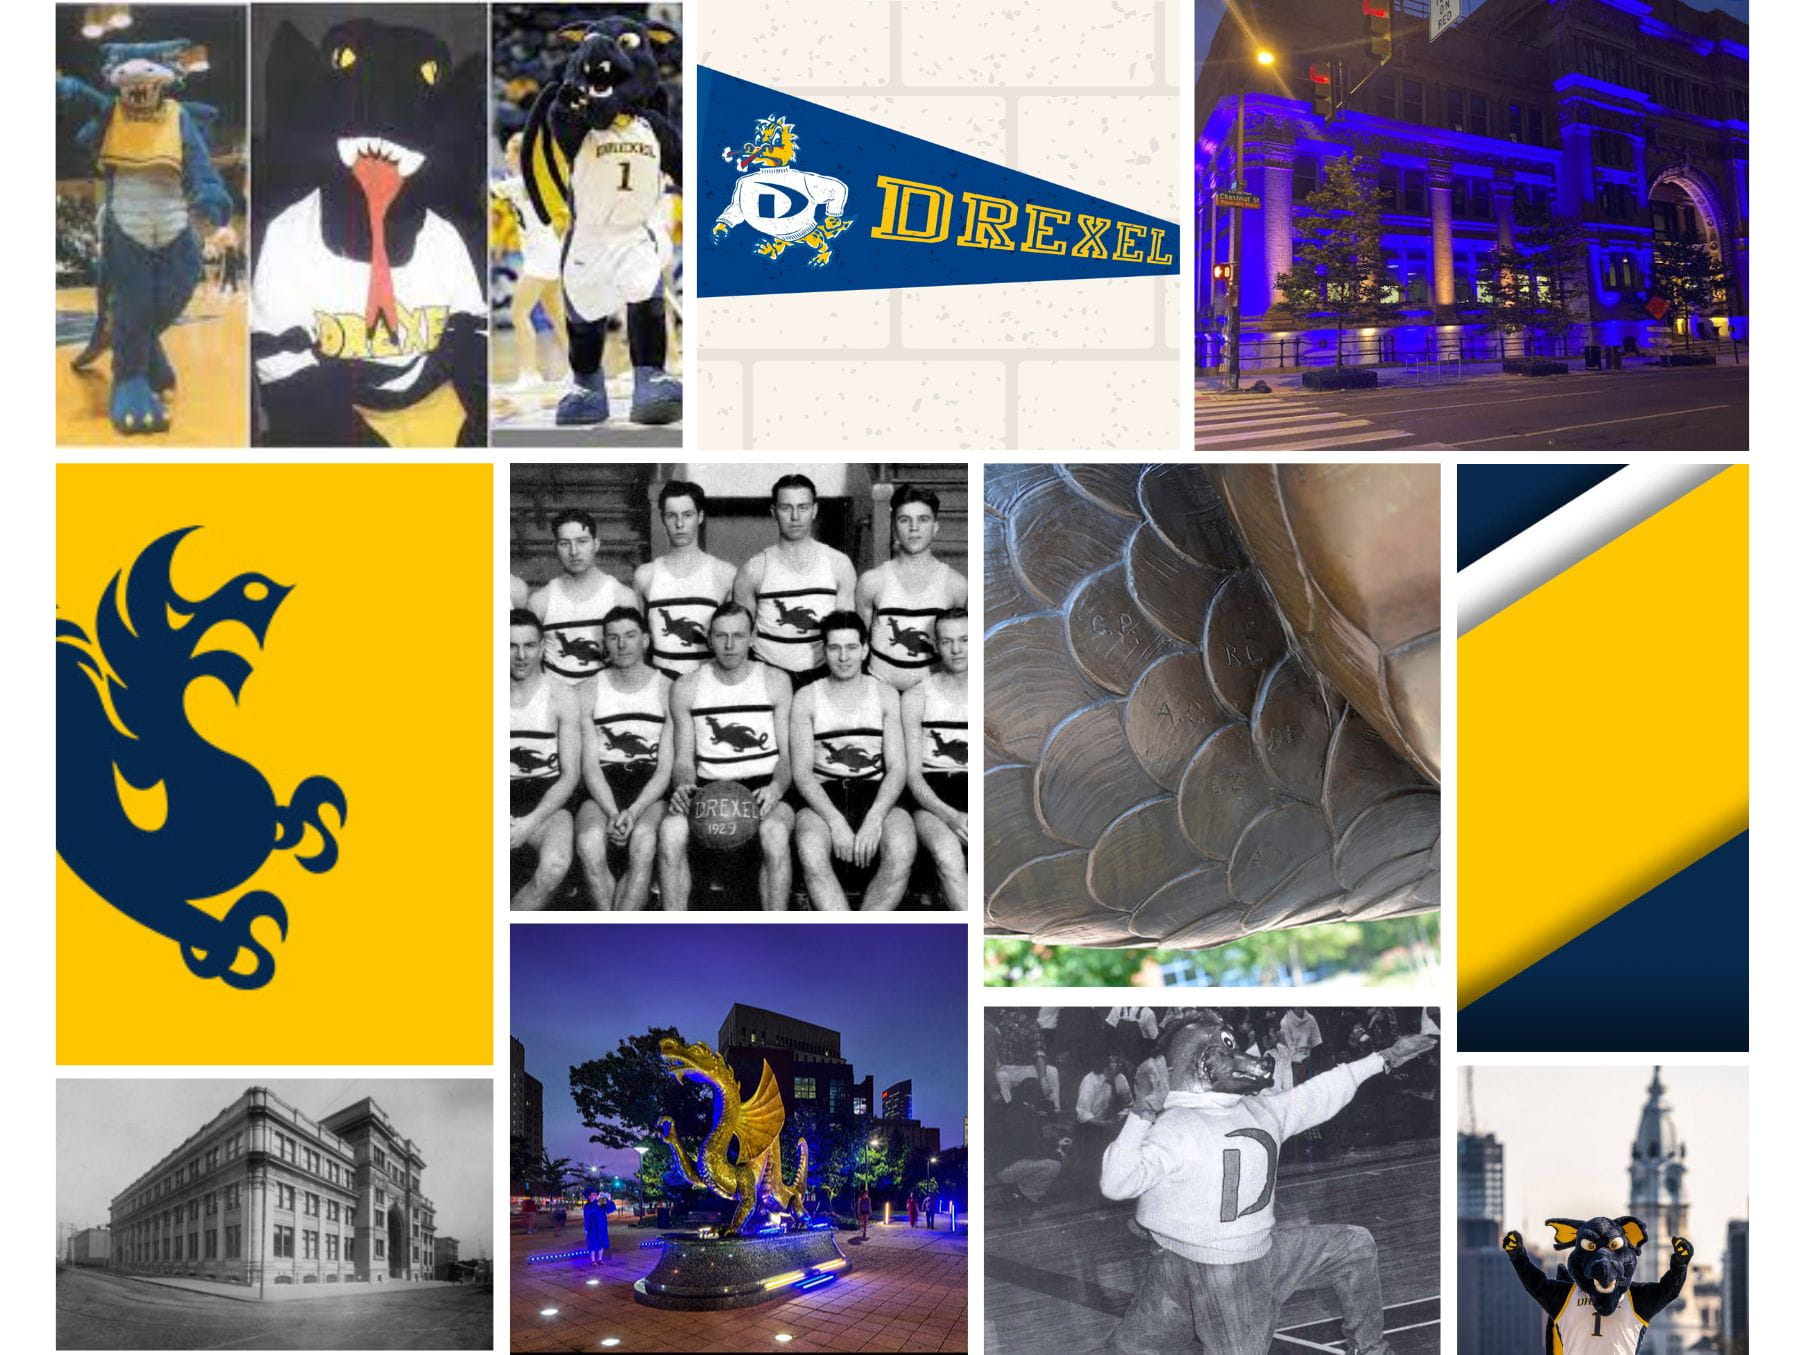 Photo collage of Drexel's Dragon statue, Dragon mascot and new and old pictures of its Main Building.